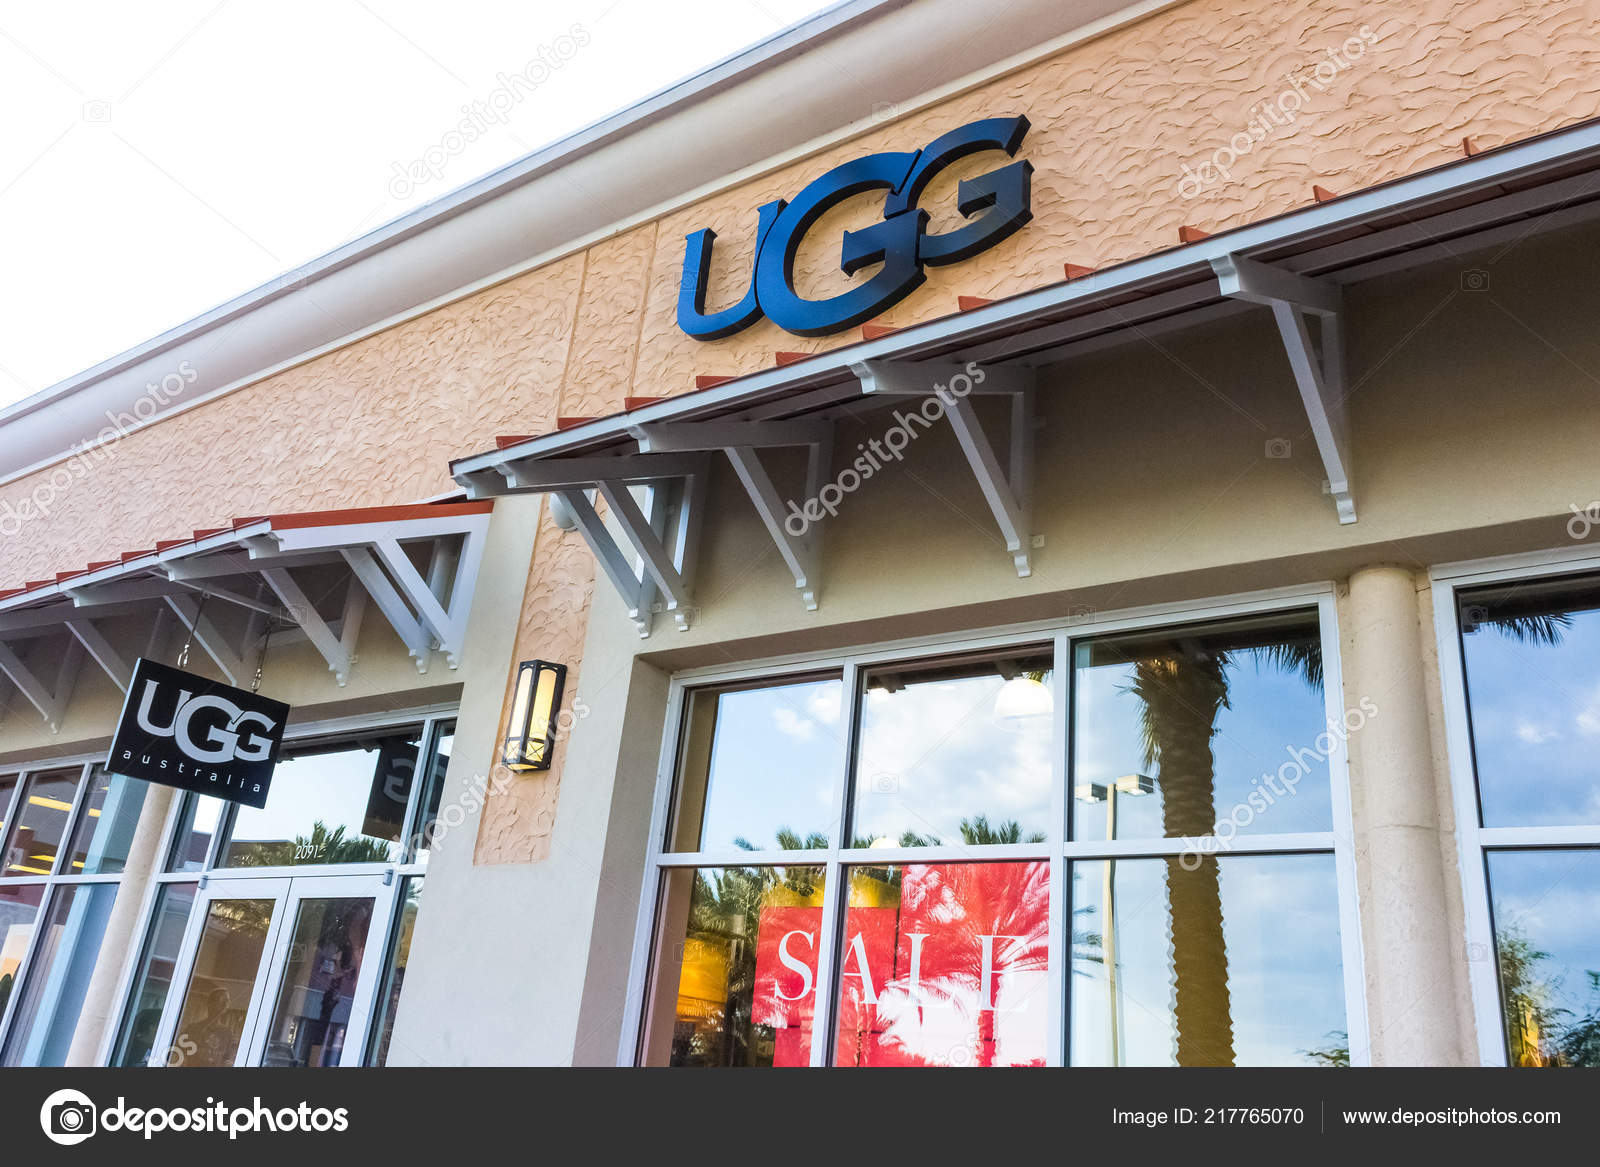 ugg outlet stores usa